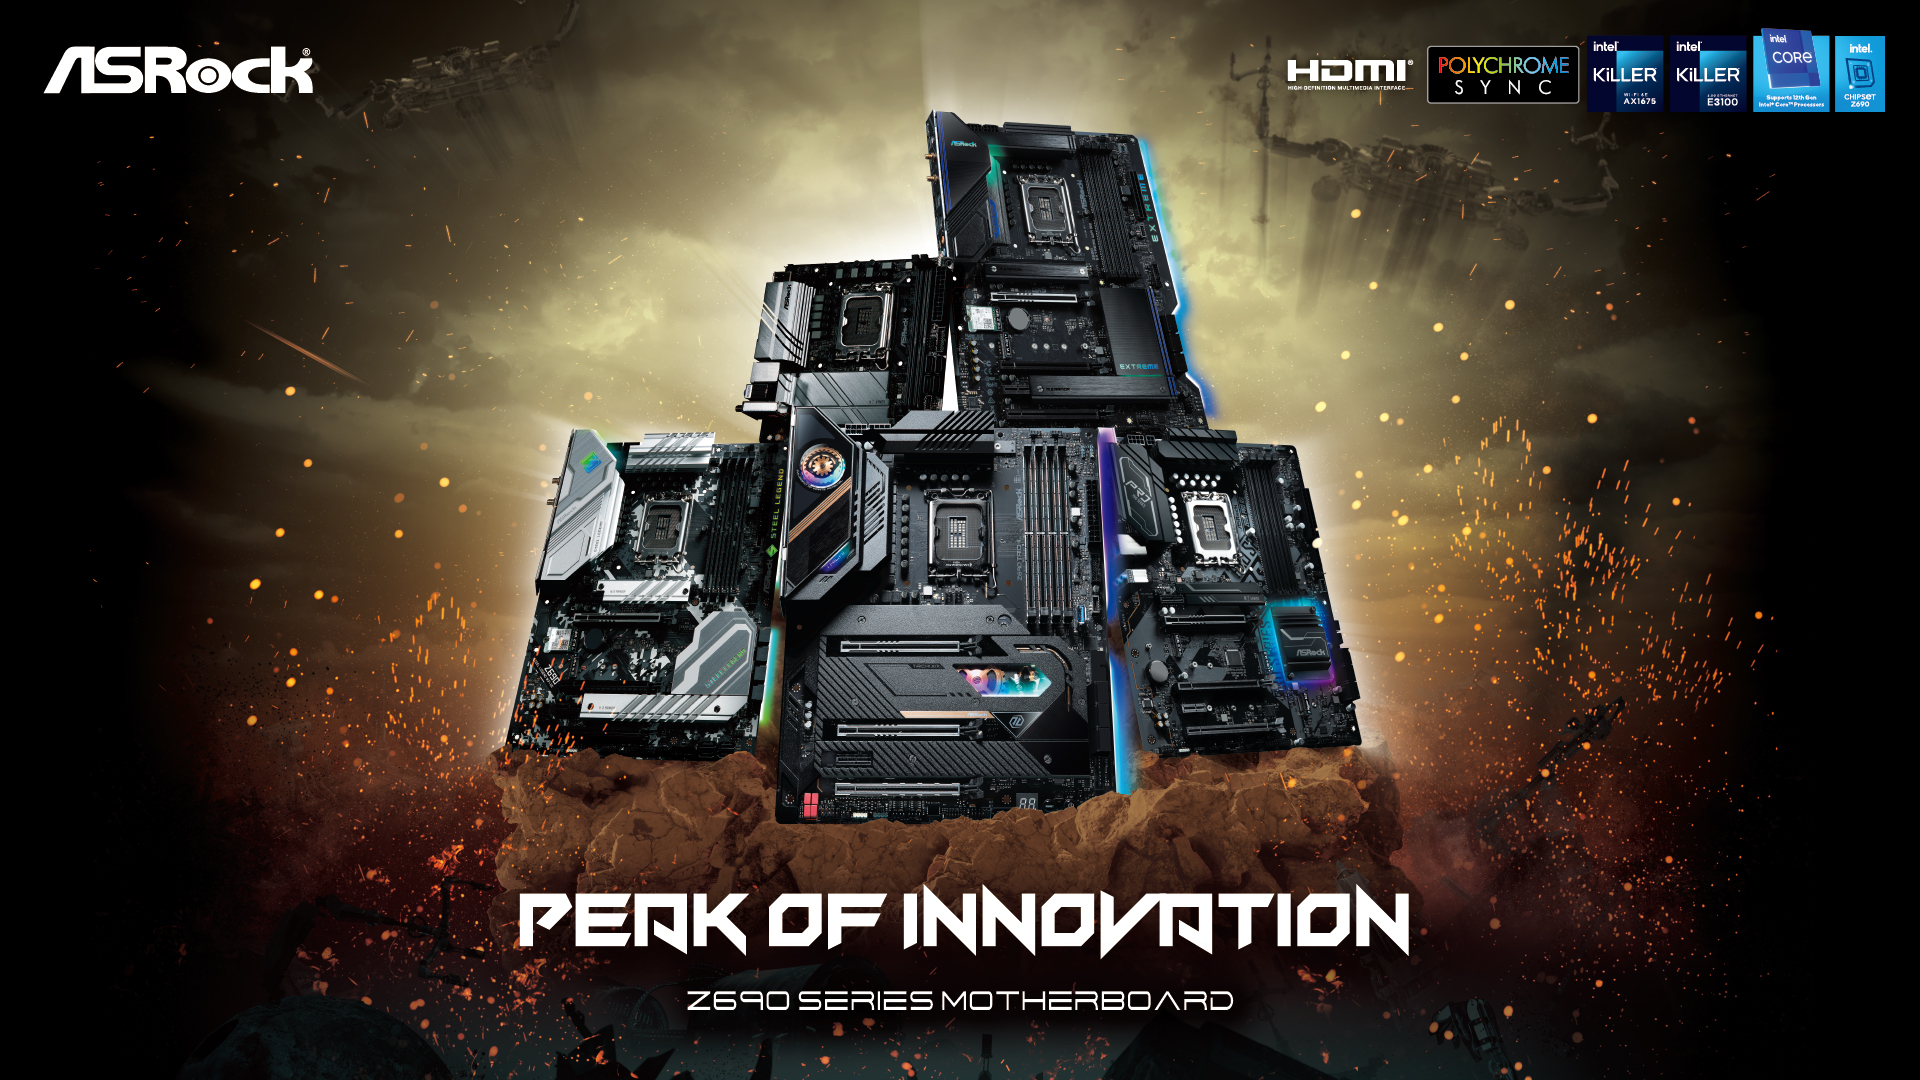 ASRock Launches Full Range of Intel<sup>®</sup> Z690 Motherboard Packed with Revolutionary Technology